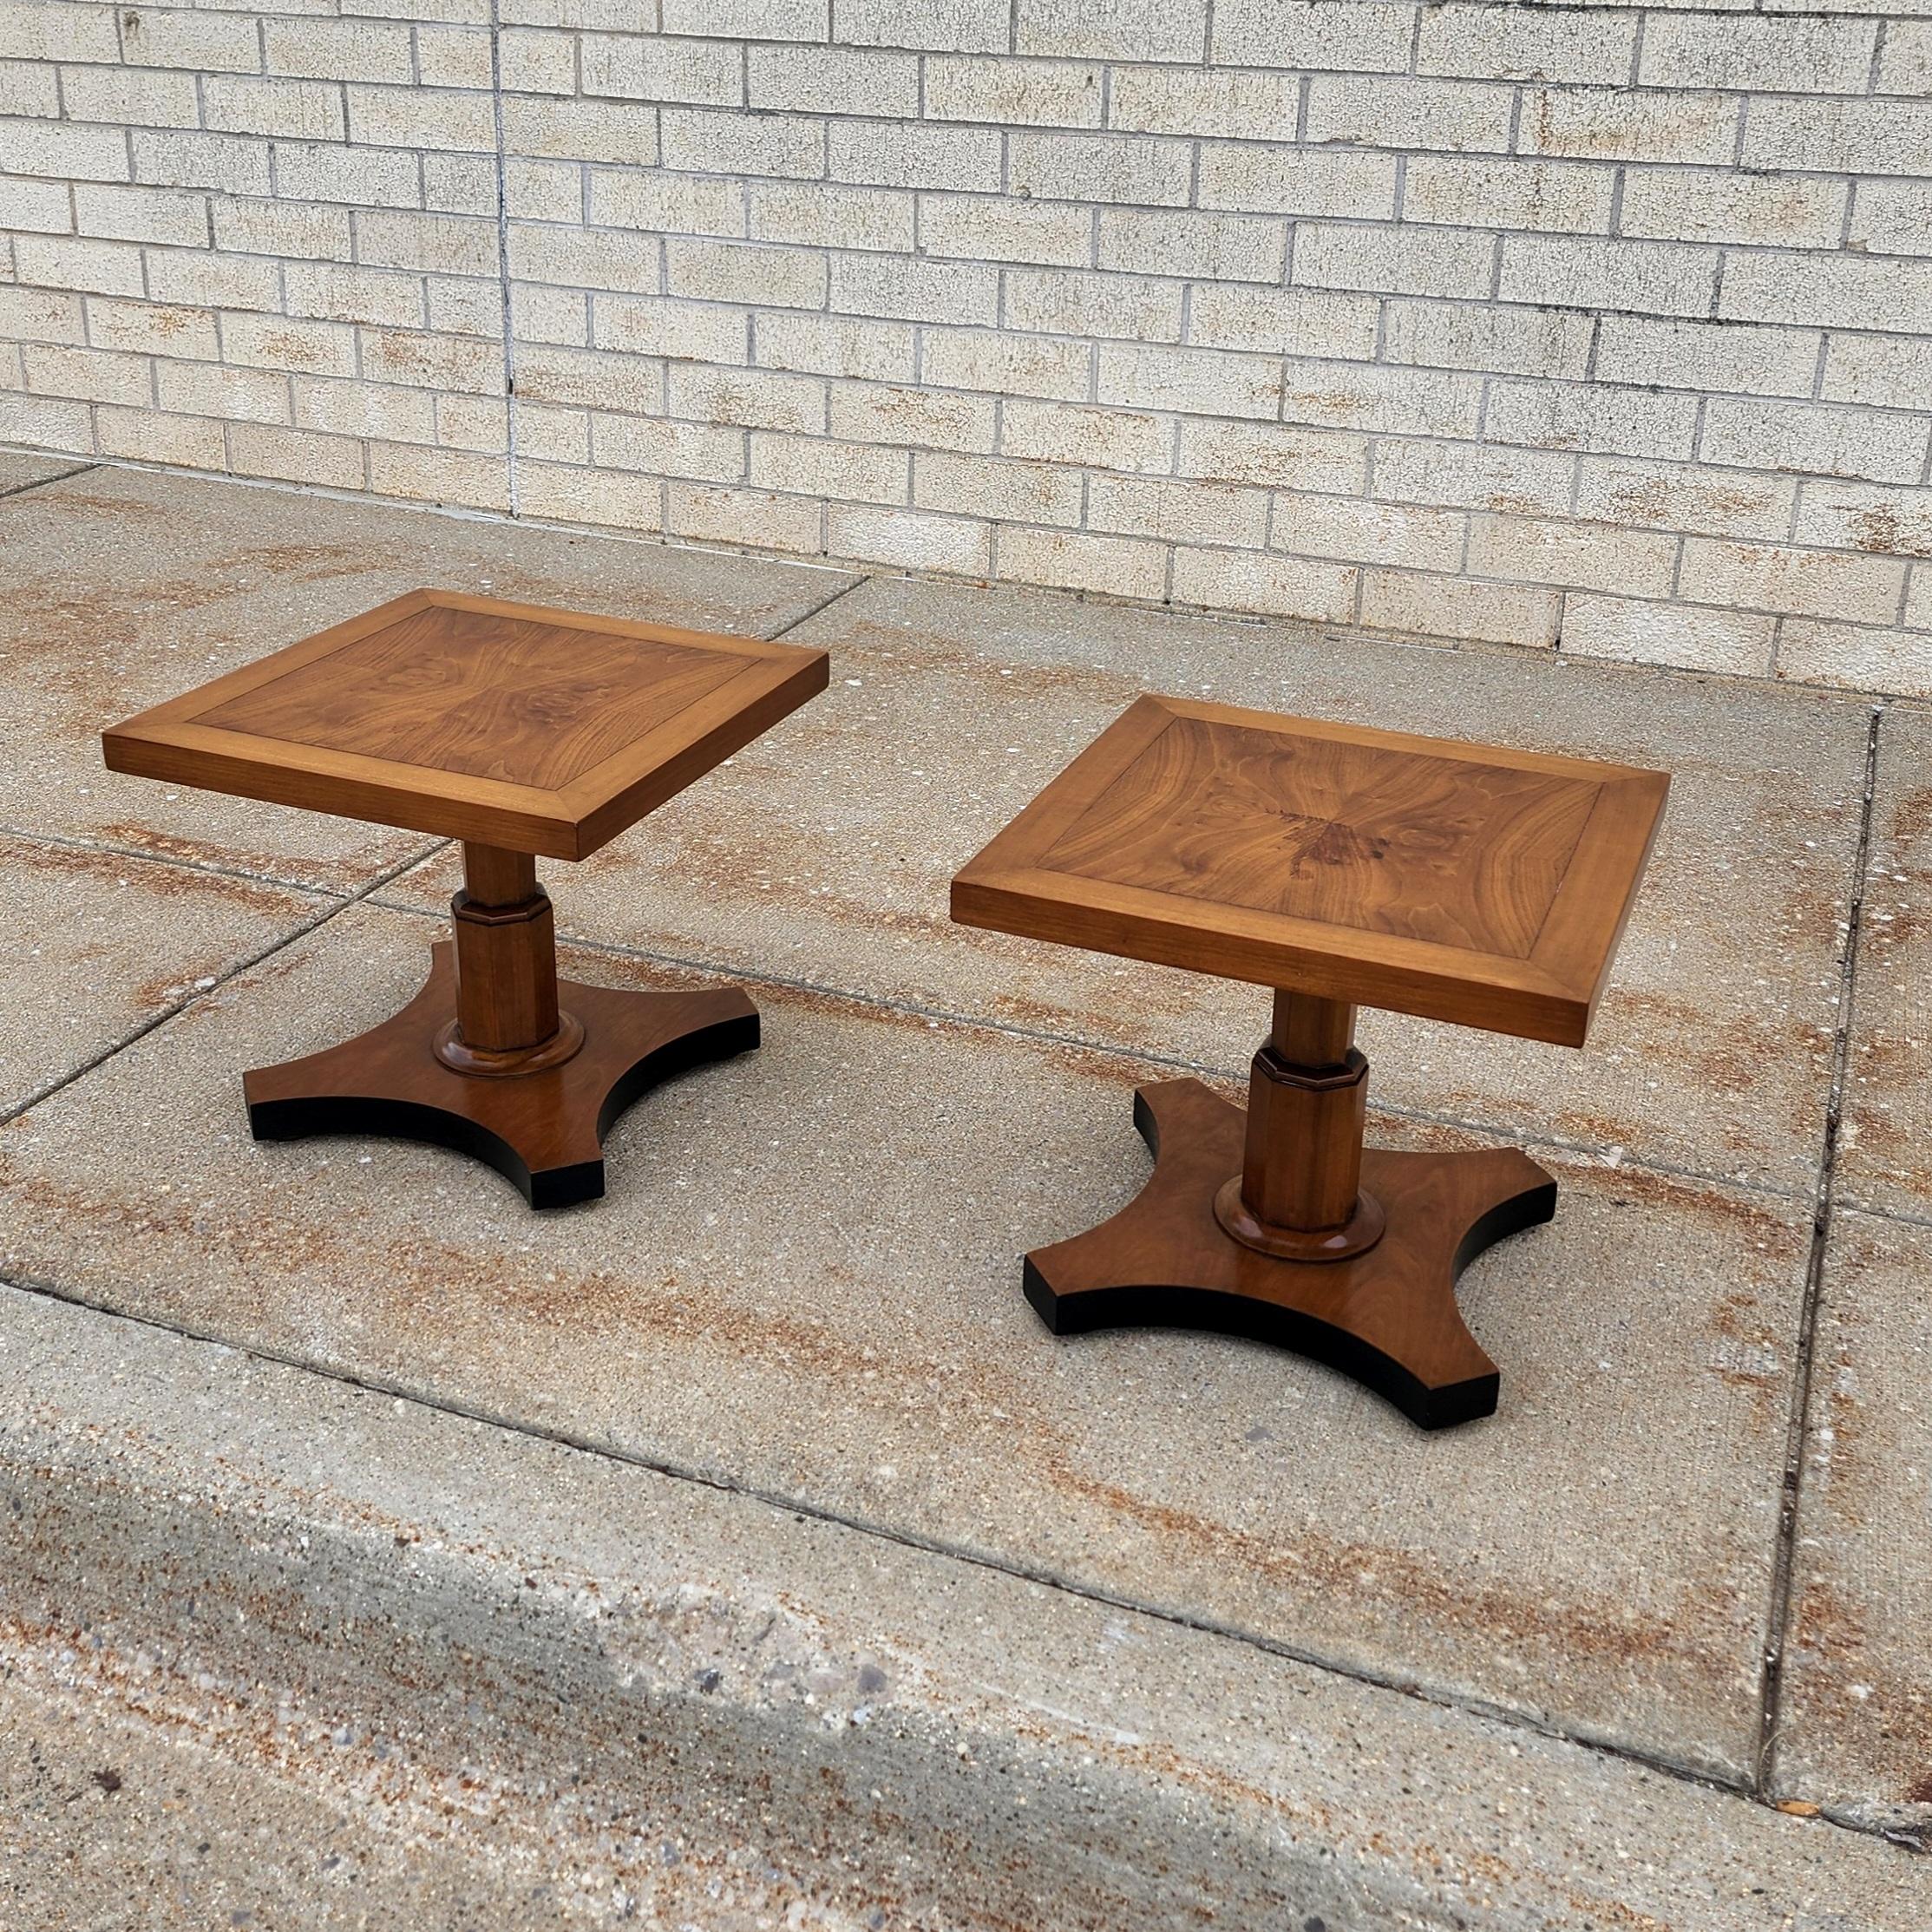 This beautiful pair of end tables have a stunning burl wood walnut top resting on pedestals with an inverted quatrefoil walnut base. The sides of base are accented in a satin black lacquer finish. They are crafted in high quality by Baker Furniture.